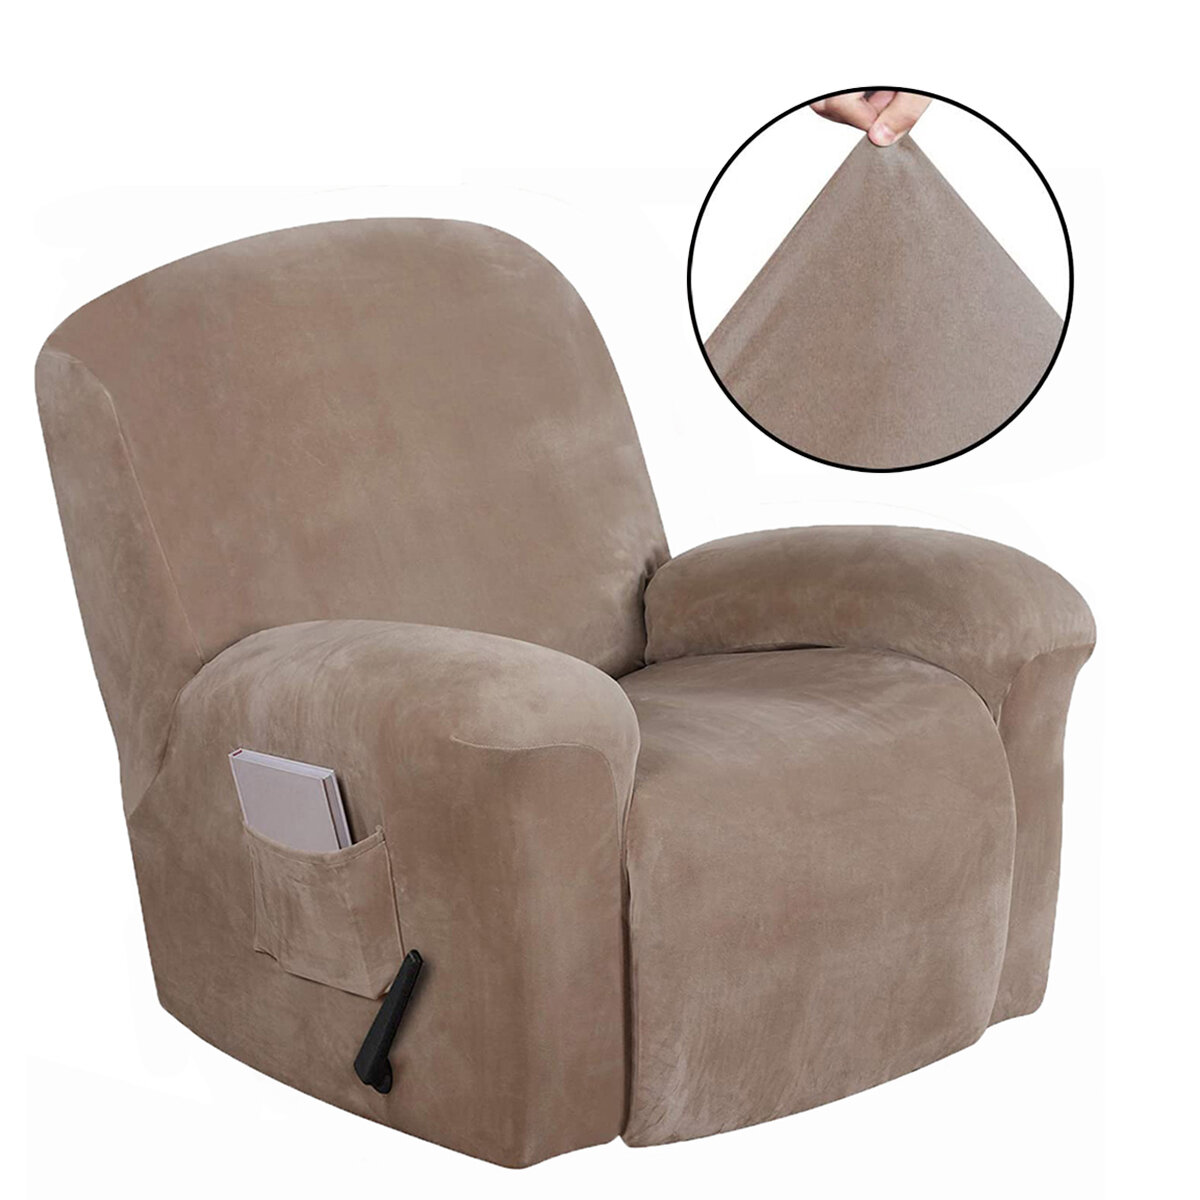 

4Pcs/set Recliner Chair Covers Full Coverage Elastic Sofa Seat Protector Stretch Slipcover Armchair Cover Home Office Fu